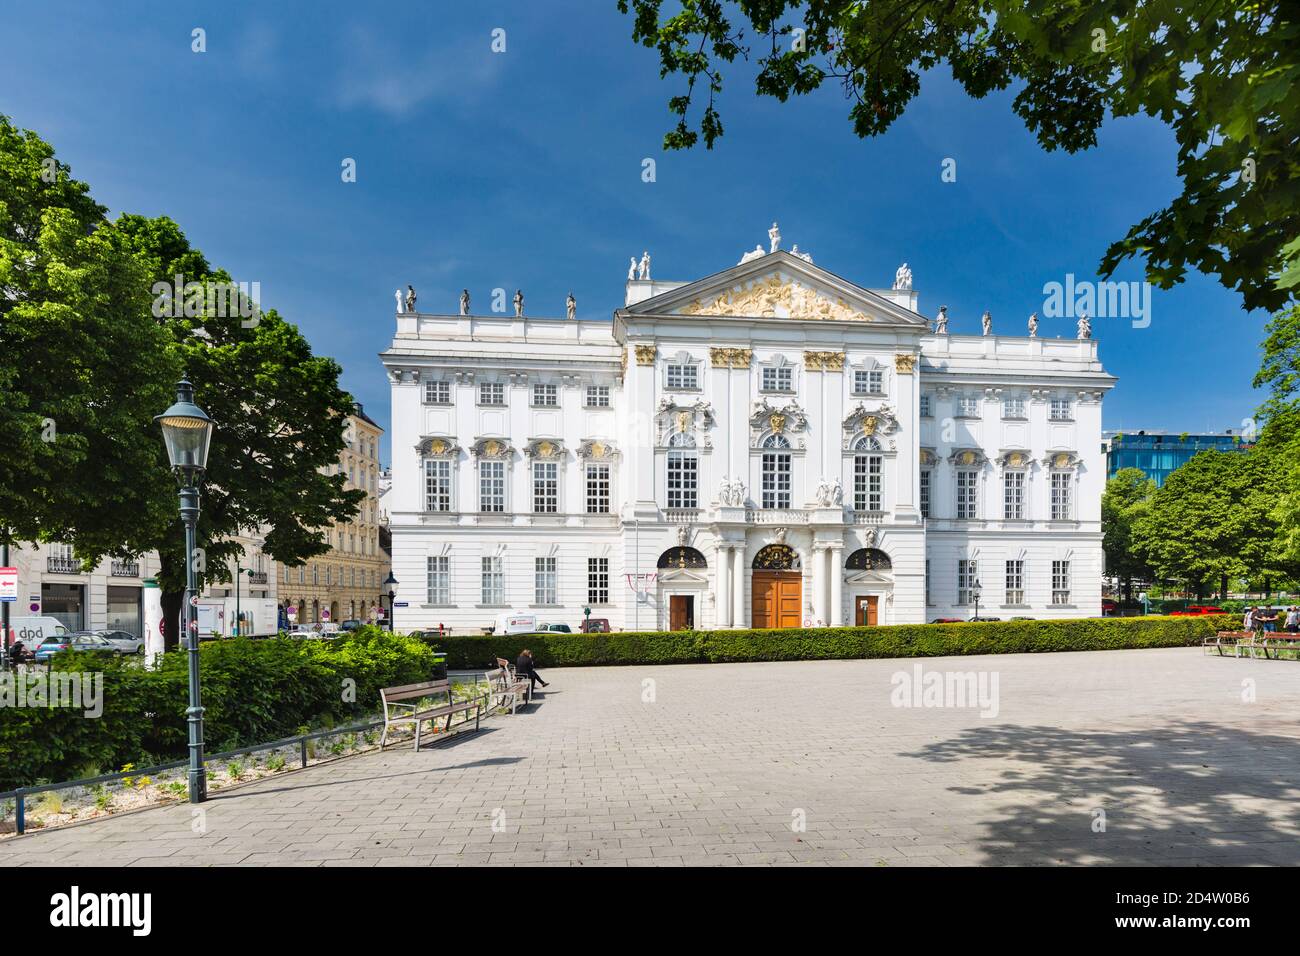 VIENNA - MAY 3: View of the Federal Ministry of Justice (Bundesministerium für Justiz), Vienna, Austria in the Palais Trautson on May 3, 2018 Stock Photo